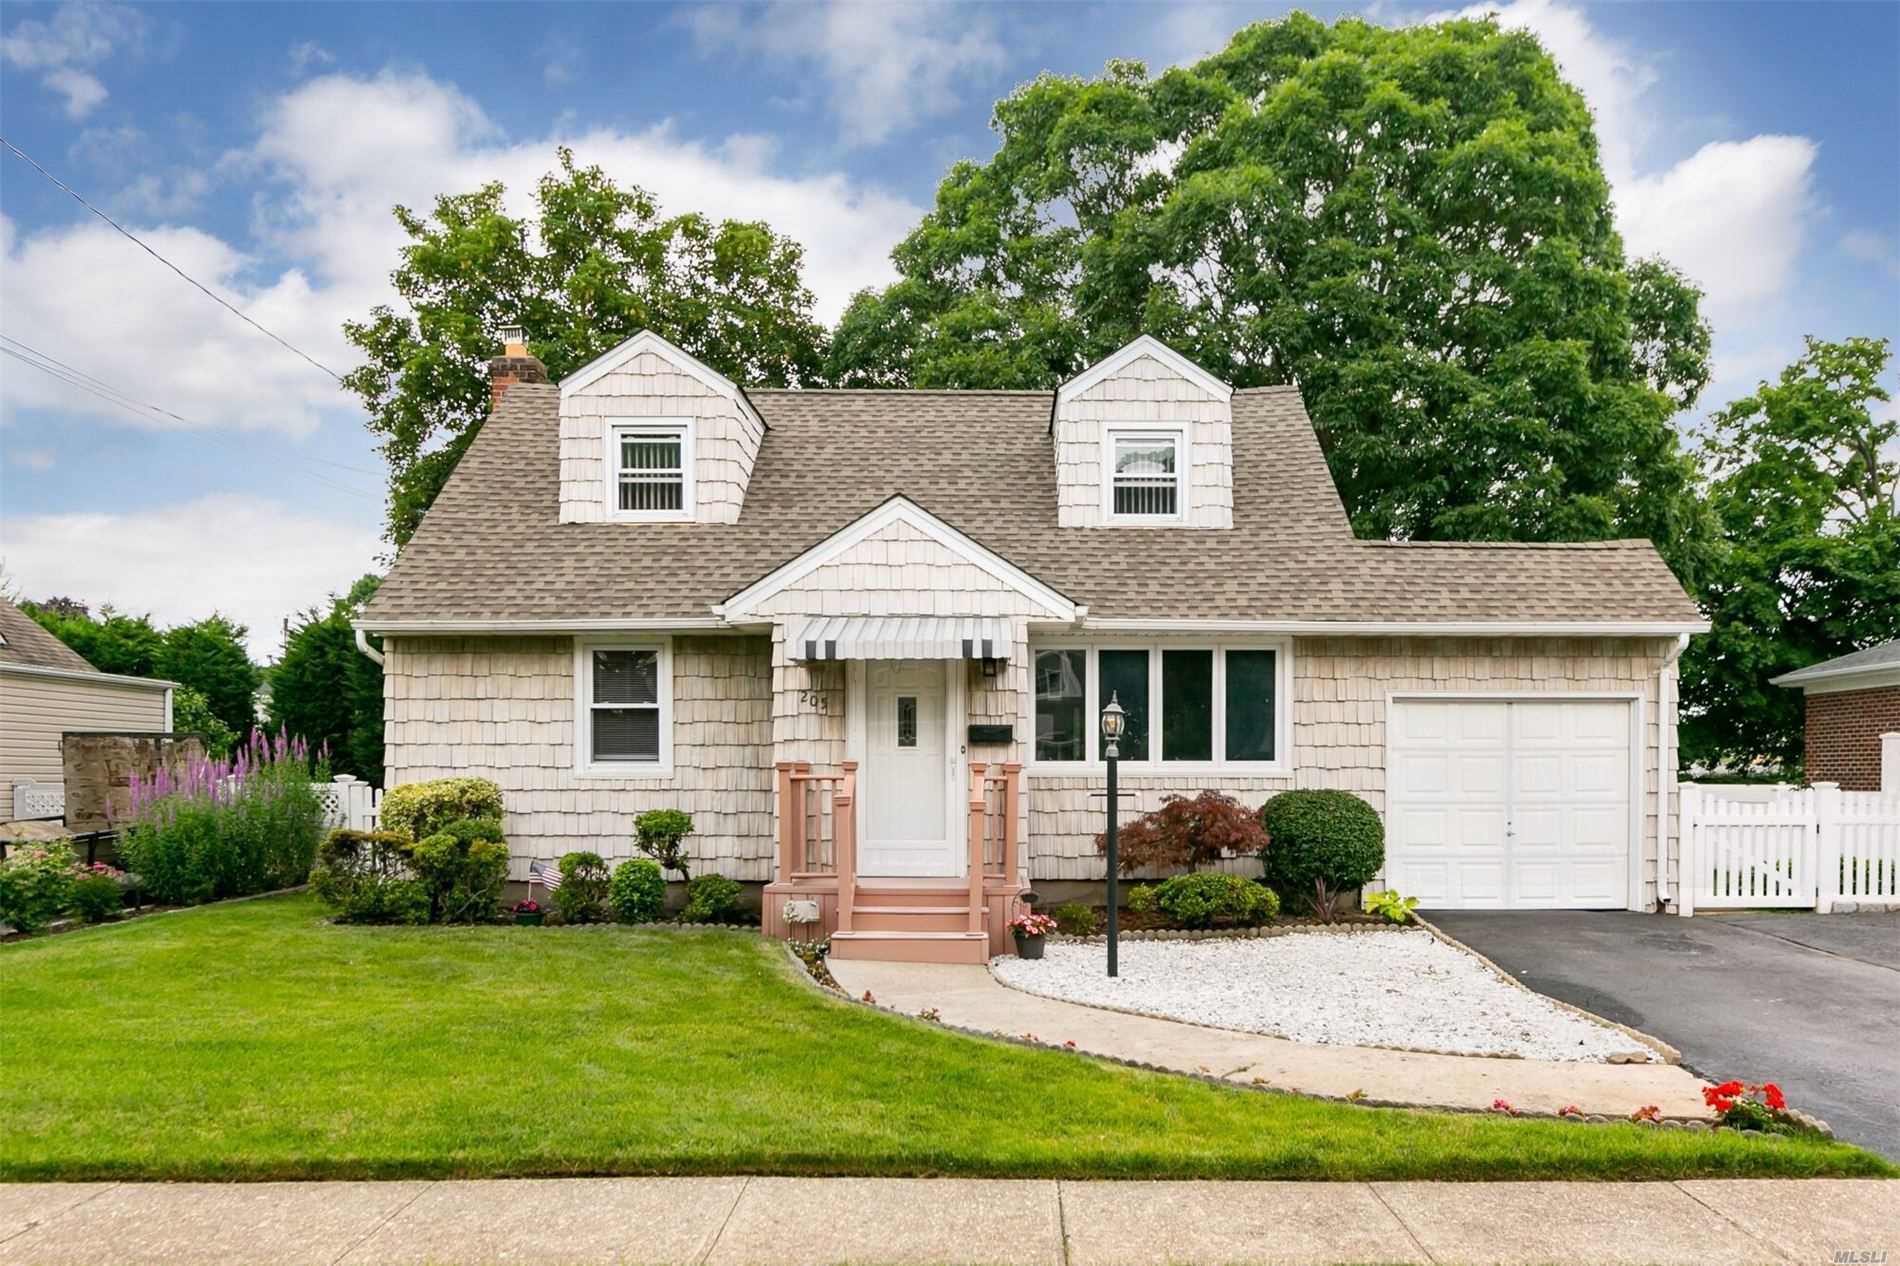 Beautiful Back Dormered Cape features Large Expanded Eat-In Kitchen with Stainless Appliances and 8&rsquo; Sliding Glass Andersen Doors leading to yard, Newer Roof (2012), New HW Heater (2016), IGS, 1.5 Attached Garage, Lovely Yard with Deck & Covered Patio,  Move in Condition.